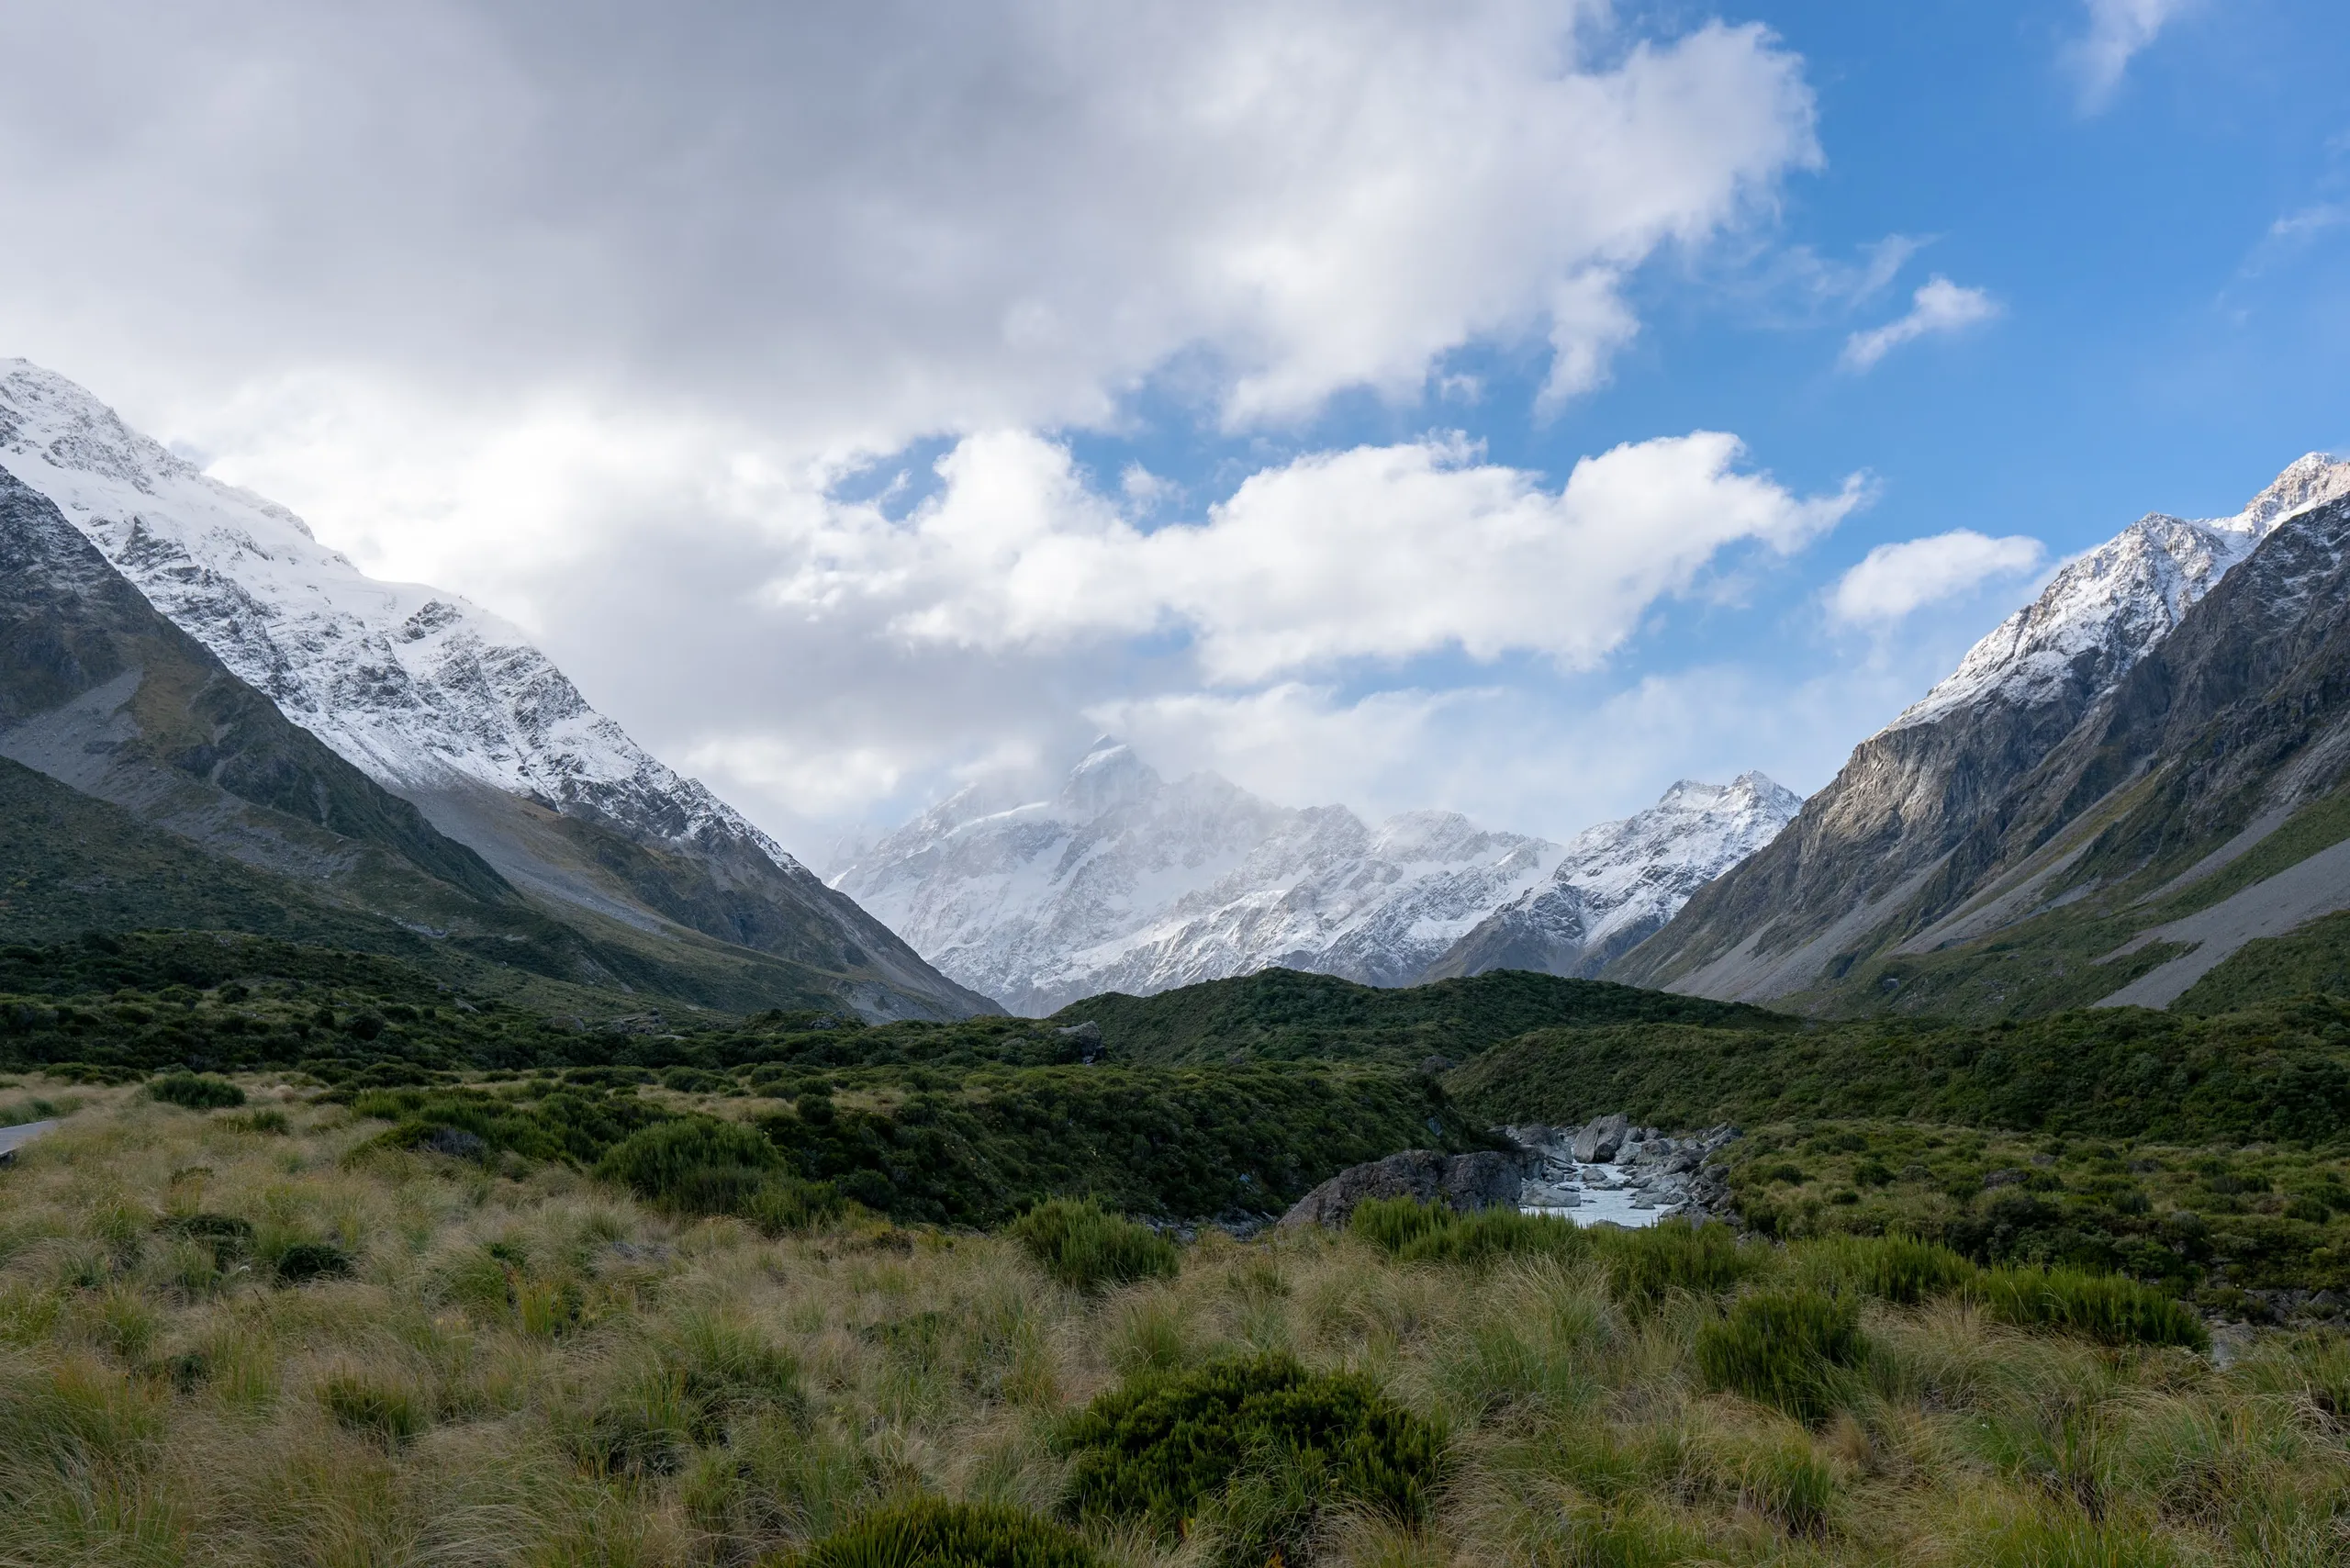 The cloud was clearing as we exited along the trail and Aoraki became almost fully visible